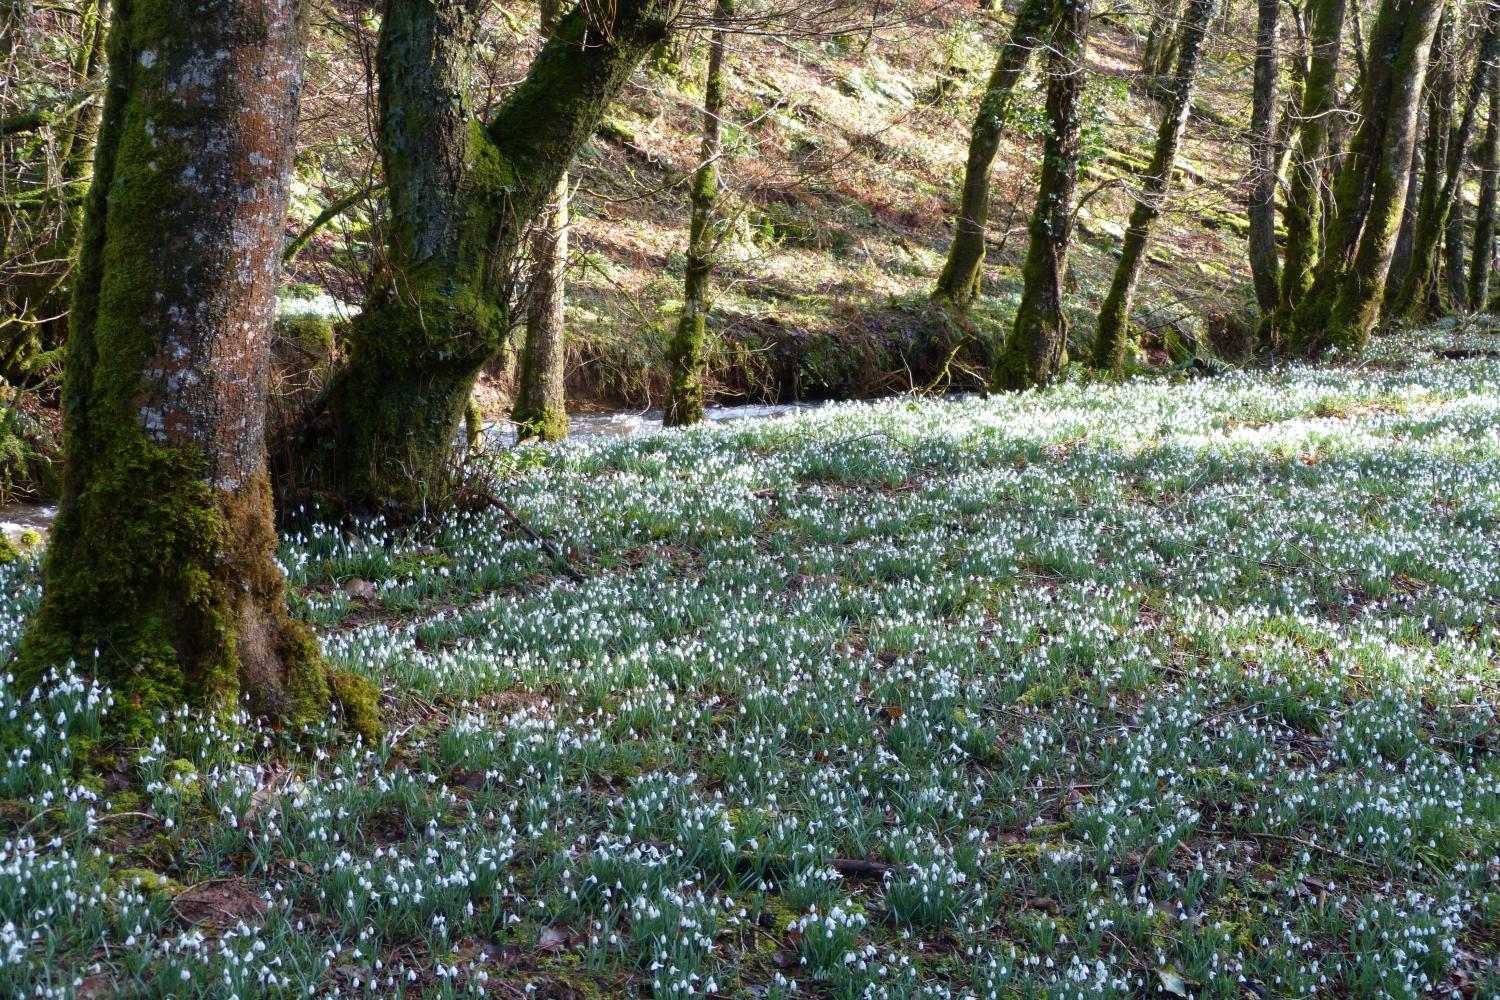 Snowdrop valley is at its best in January and February, and is a half hour walk from the cottage